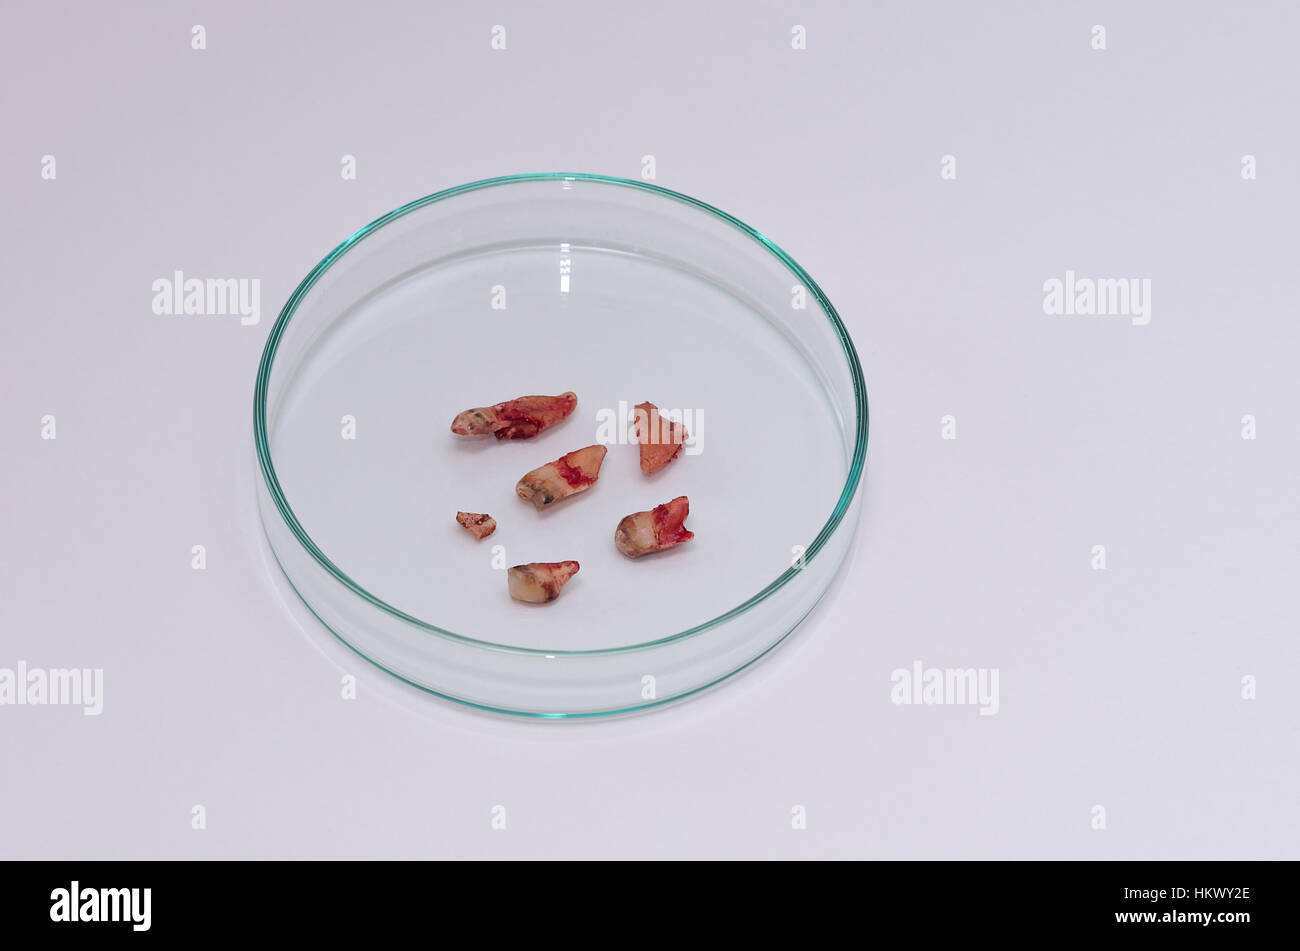 Fragments of a human tooth after extraction in a petri dish. Stock Photo